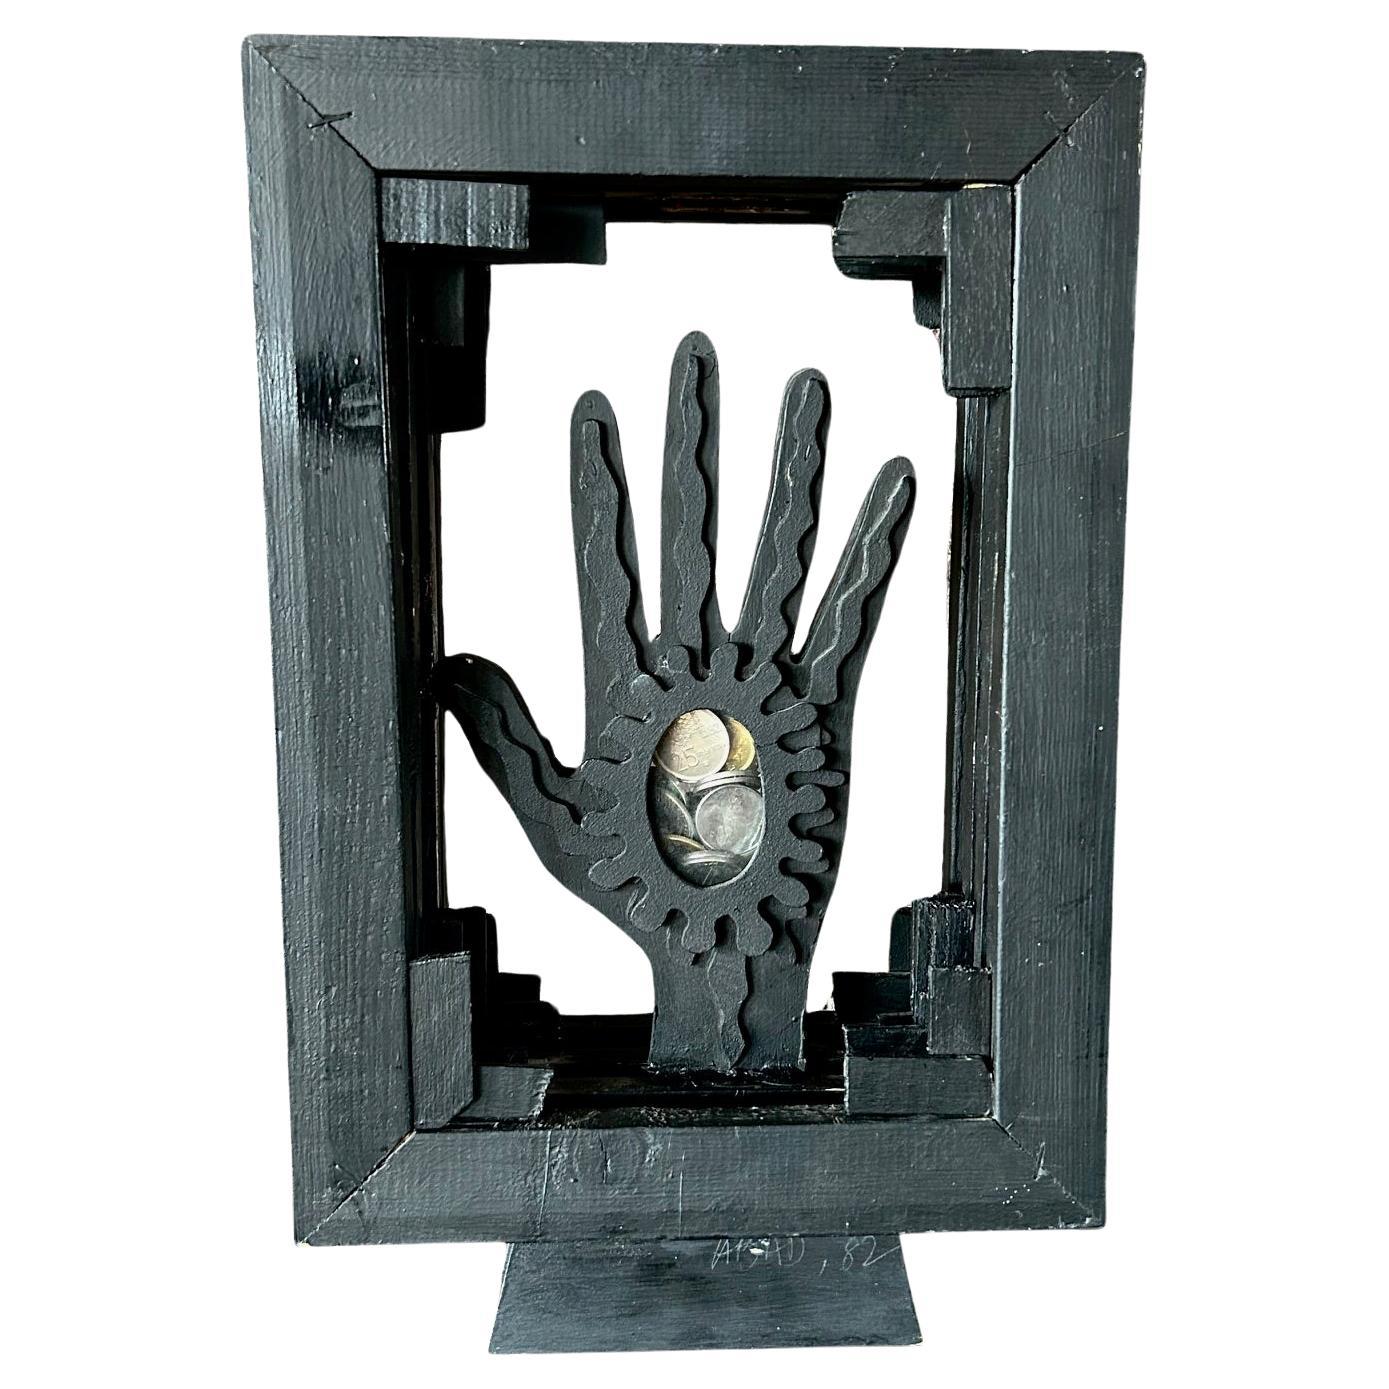 Wooden Sculpture in black featuring a central hand within a framework and containing metal coins by Spanish artist Antoni Abad. 
Abad's works have been exhibited in major museums and galleries worldwide.